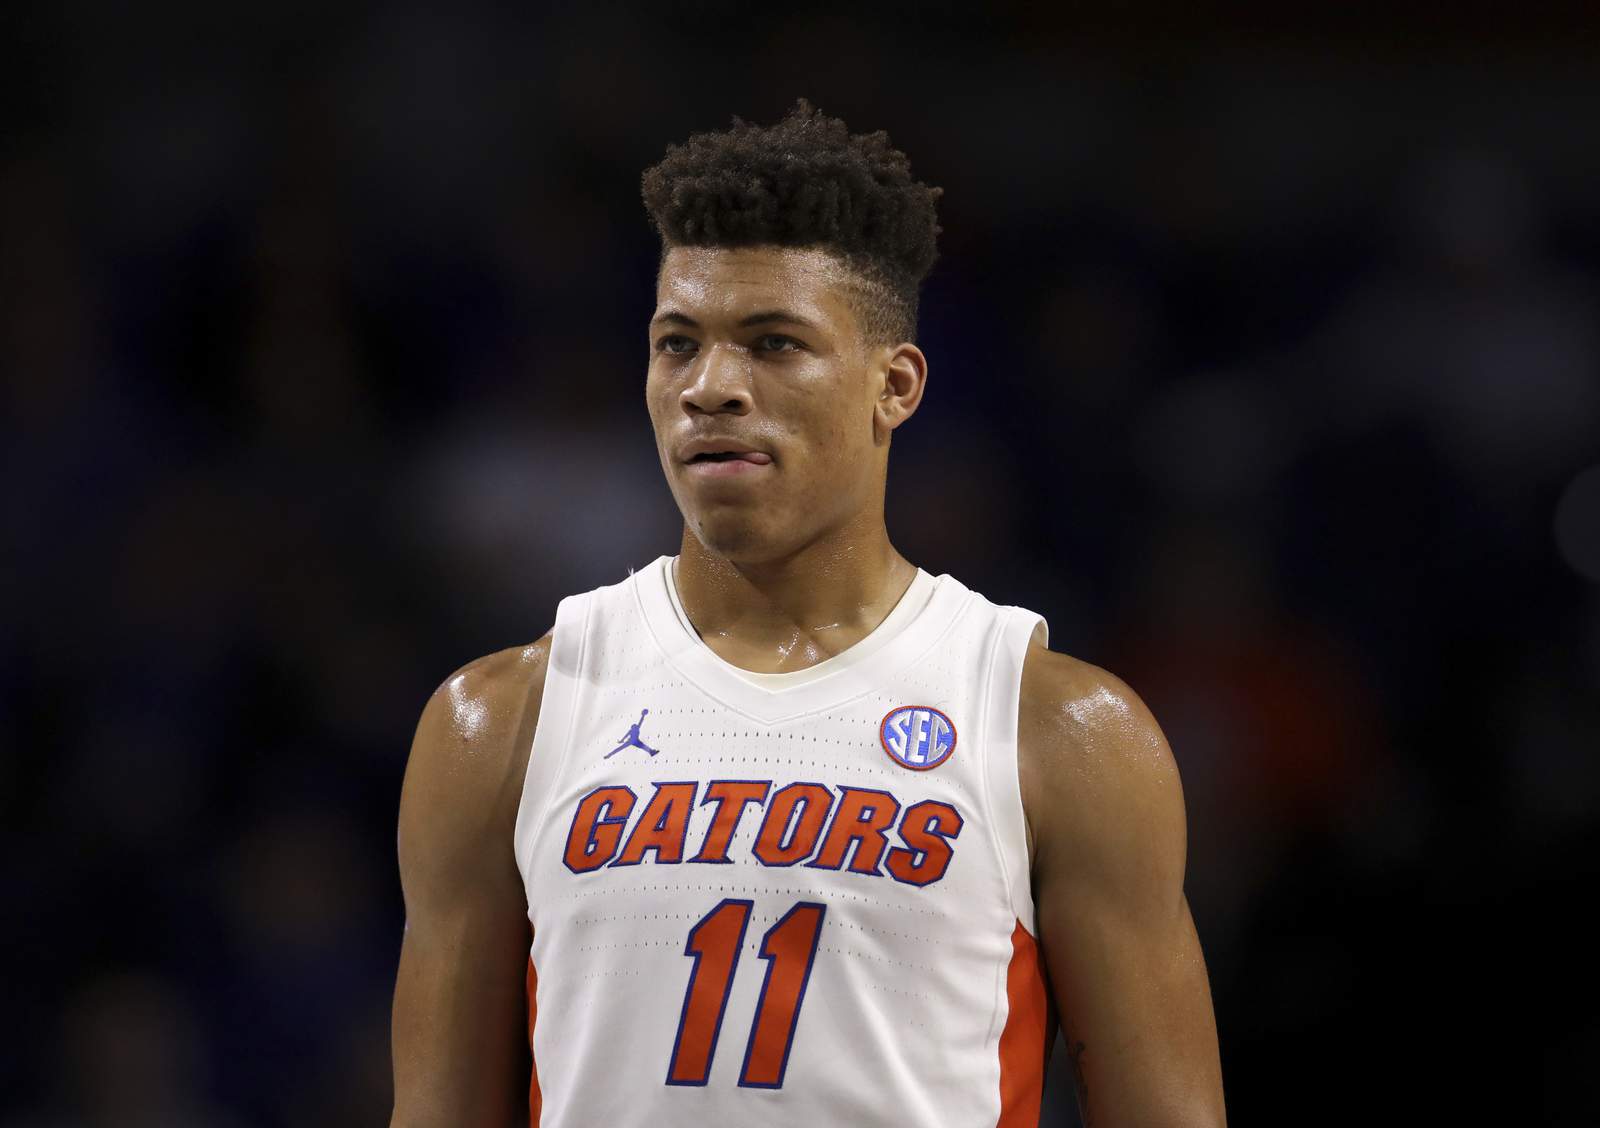 Florida’s Keyontae Johnson rejoins team, works as coach amid recovery